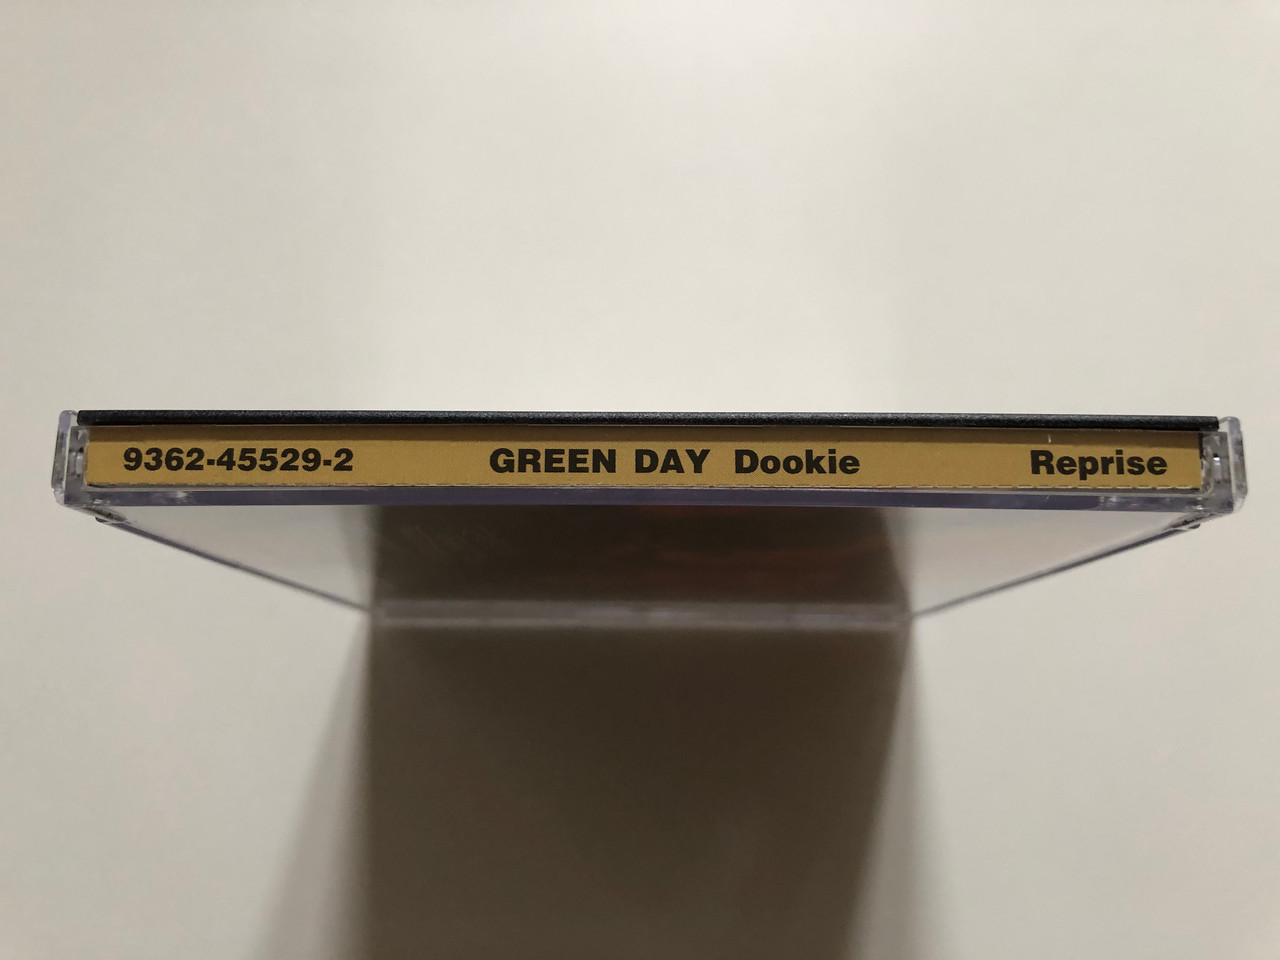 https://cdn10.bigcommerce.com/s-62bdpkt7pb/products/0/images/309971/Green_Day_Dookie_Reprise_Records_Audio_CD_1994_9362-45529-2_3__87038.1699304489.1280.1280.JPG?c=2